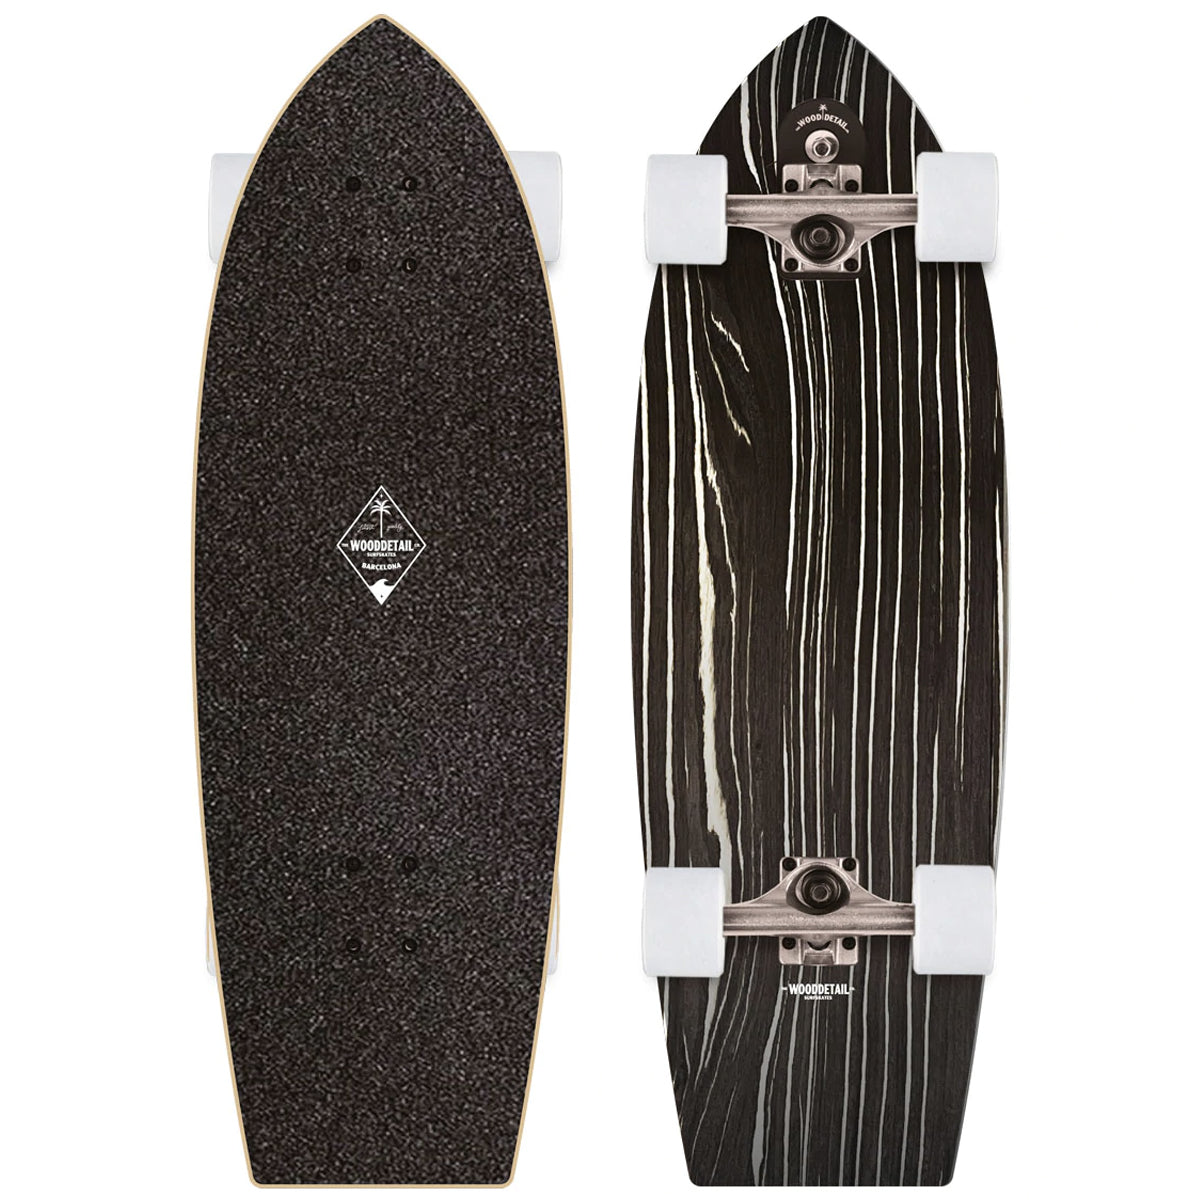 WoodDetail Peniche 32" Ebony Surfskate 2022 Complete